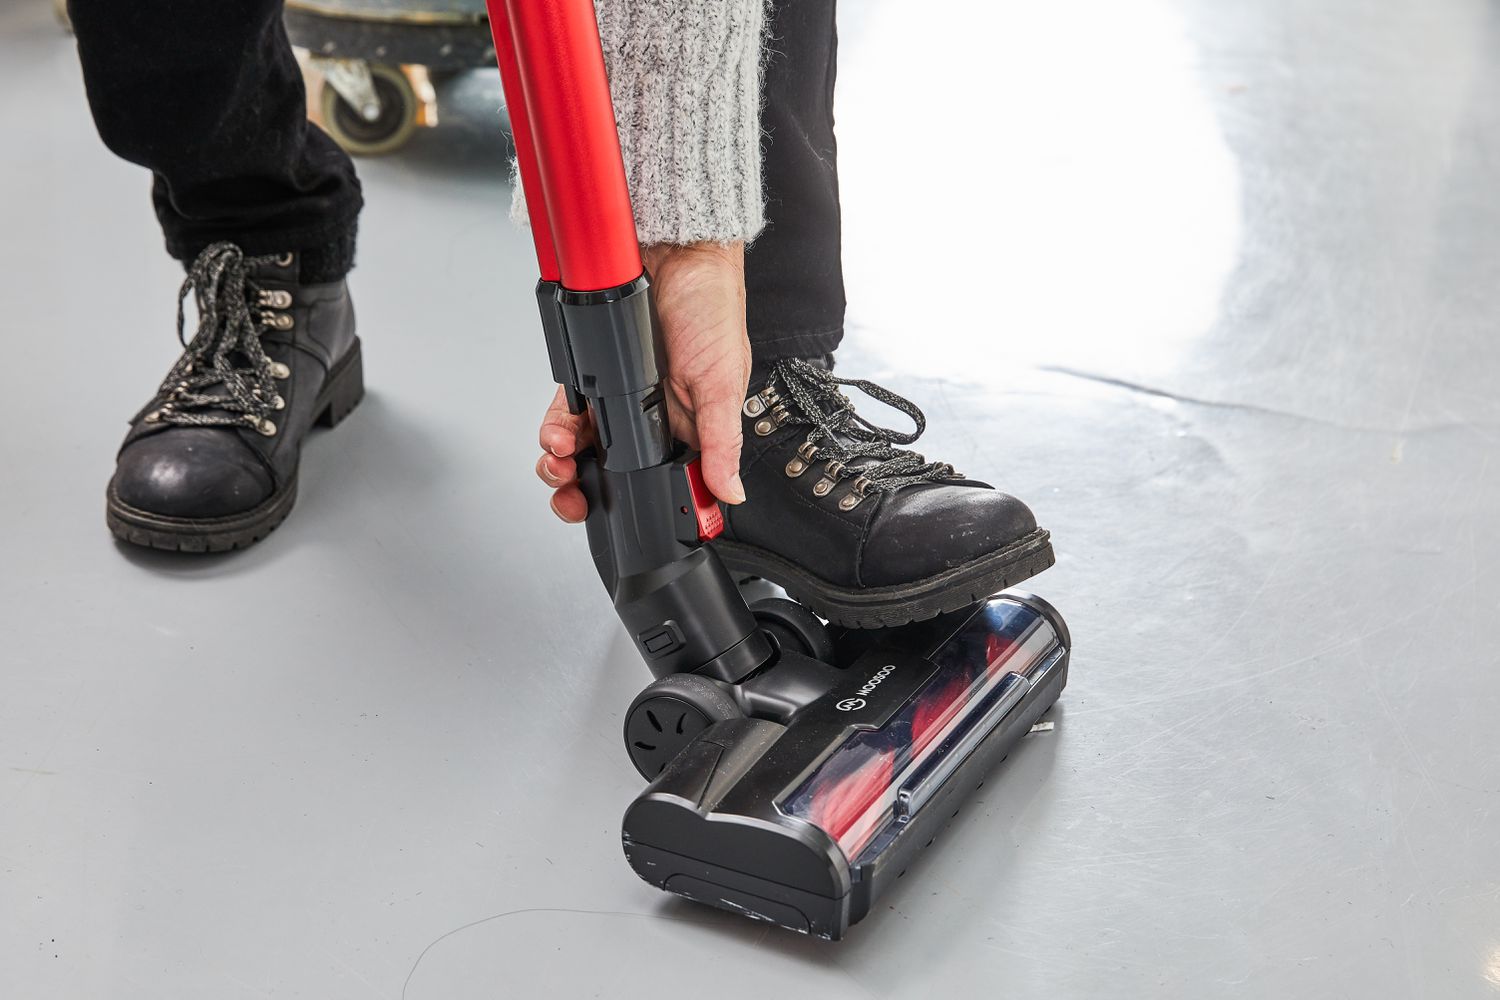 Person with their foot on the Moosoo K23 Pro Cordless Stick Vacuum